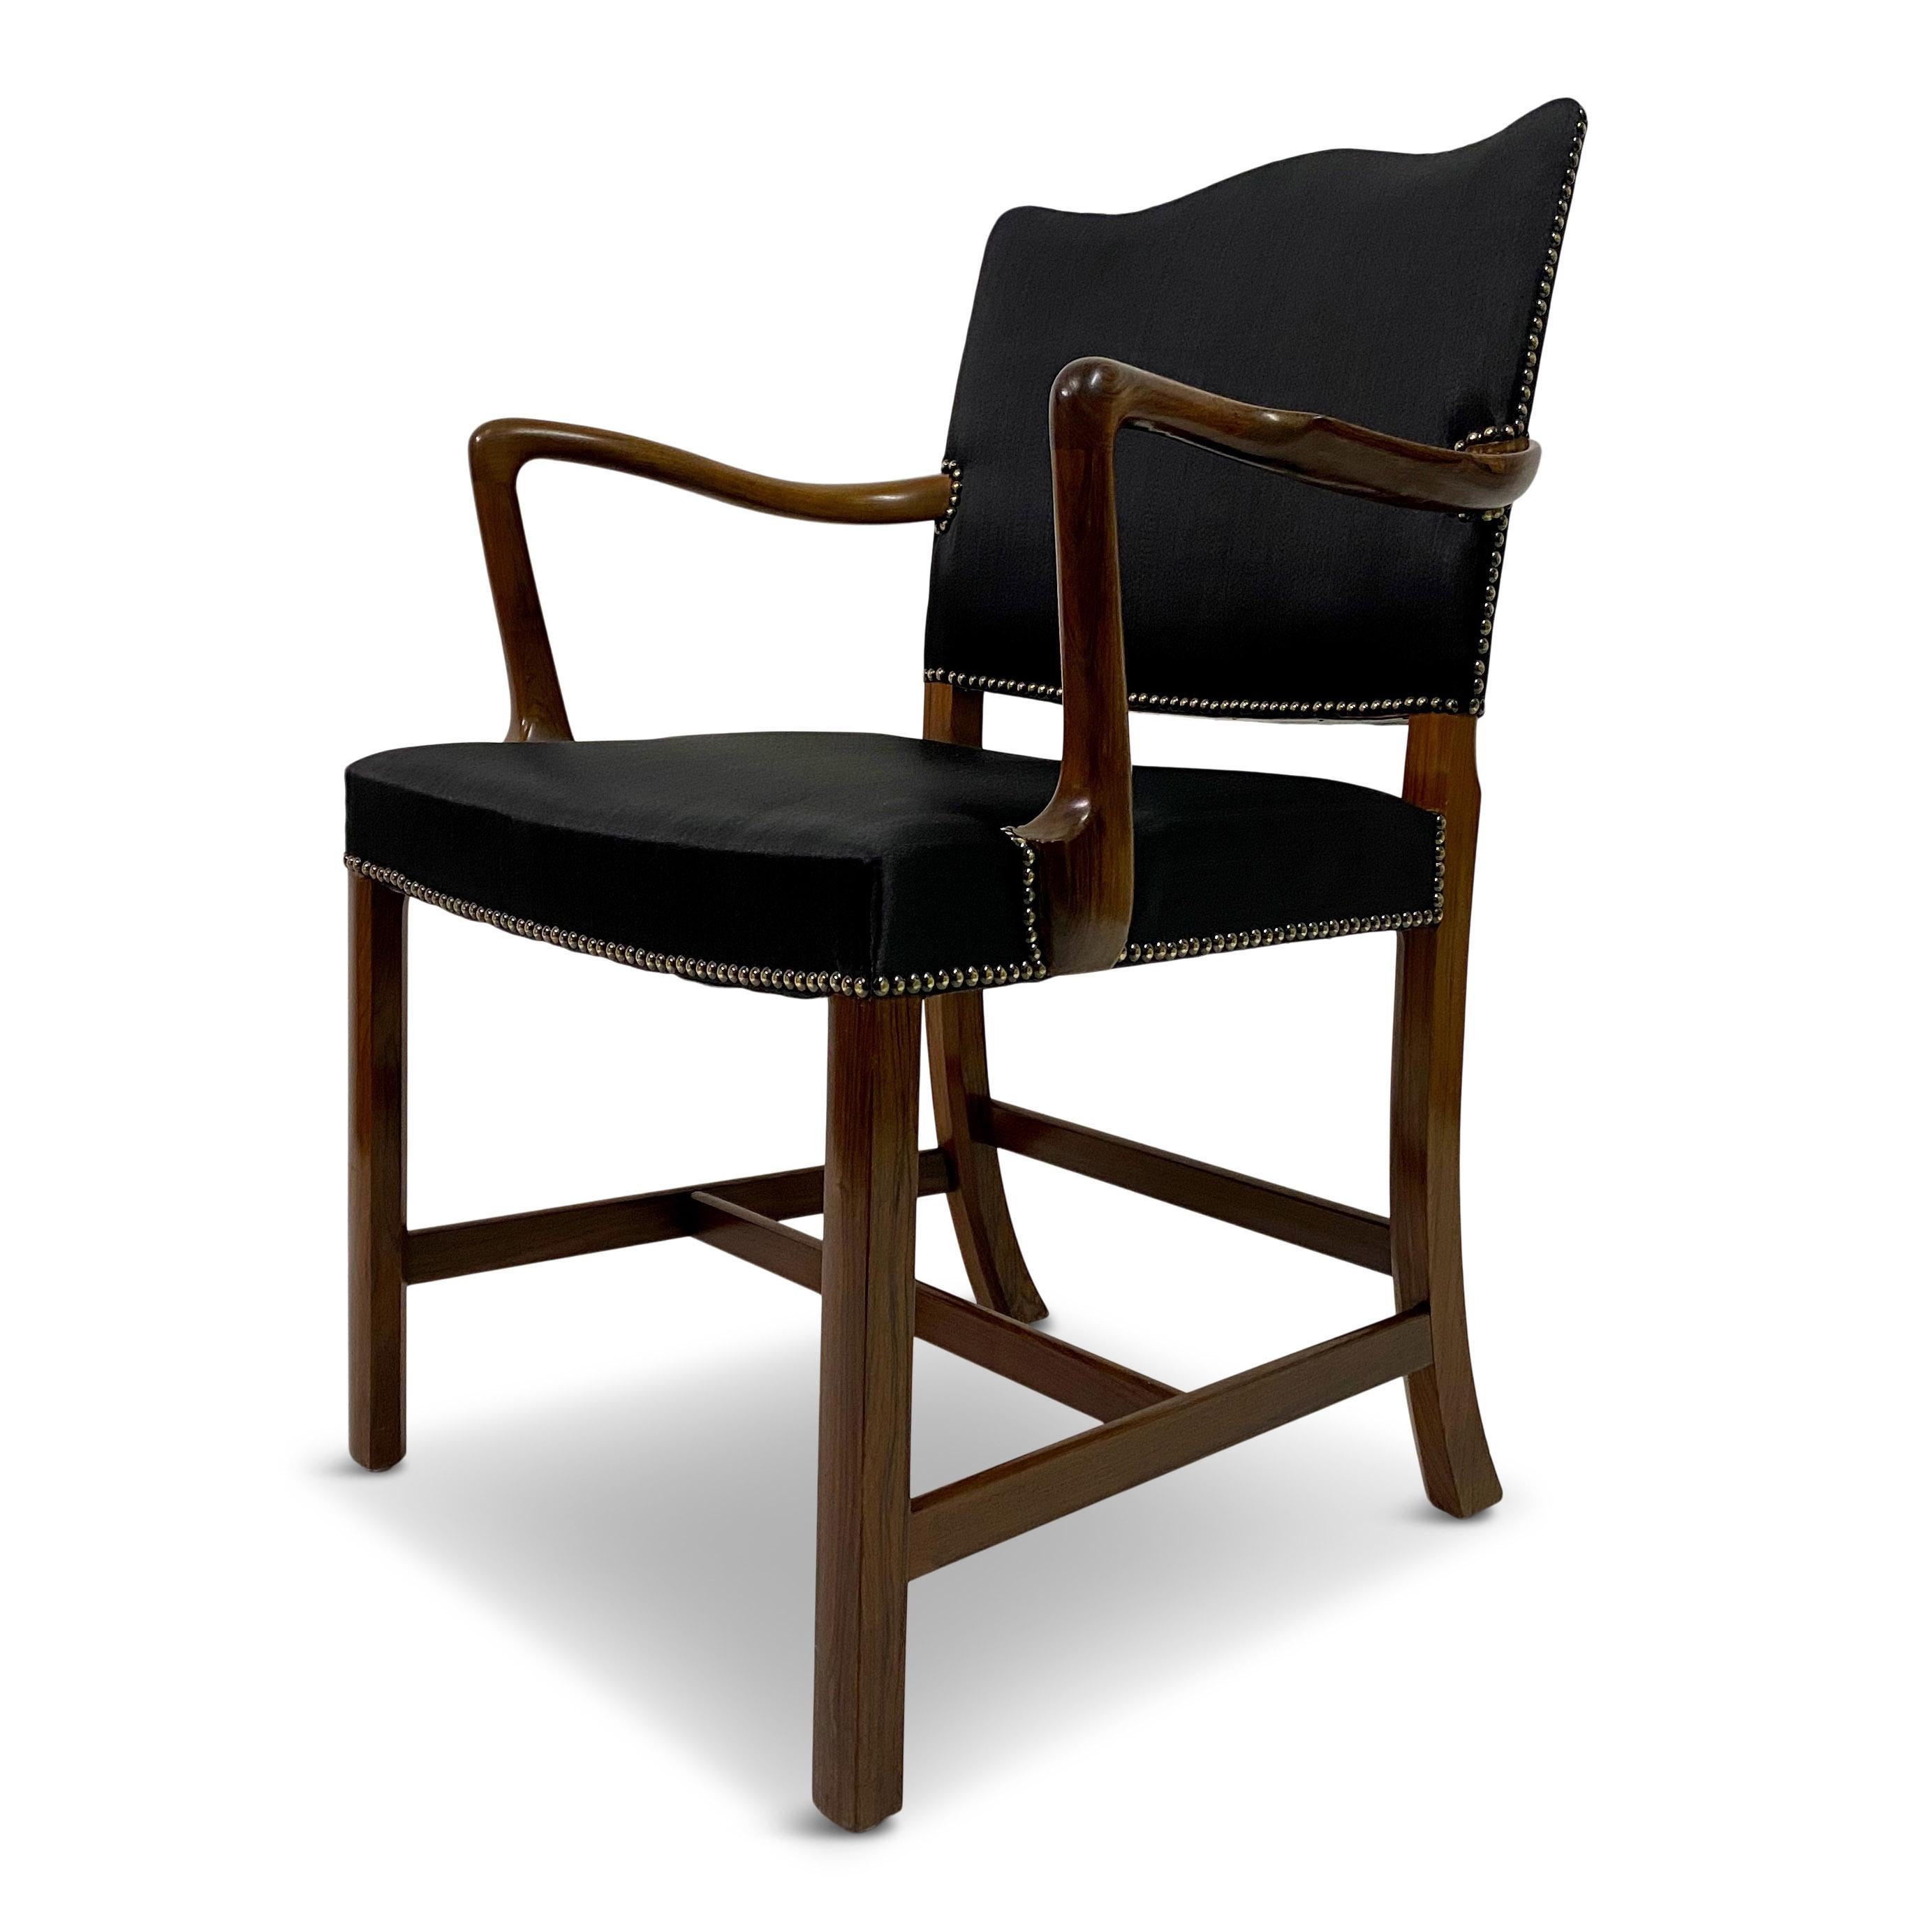 Armchair or desk chair

By Ole Wanscher

Made by A.J Iversen 

New horsehair upholstery by John Boyd Textiles

Fantastic quality with exceptional wood working details.

Denmark 1940s.